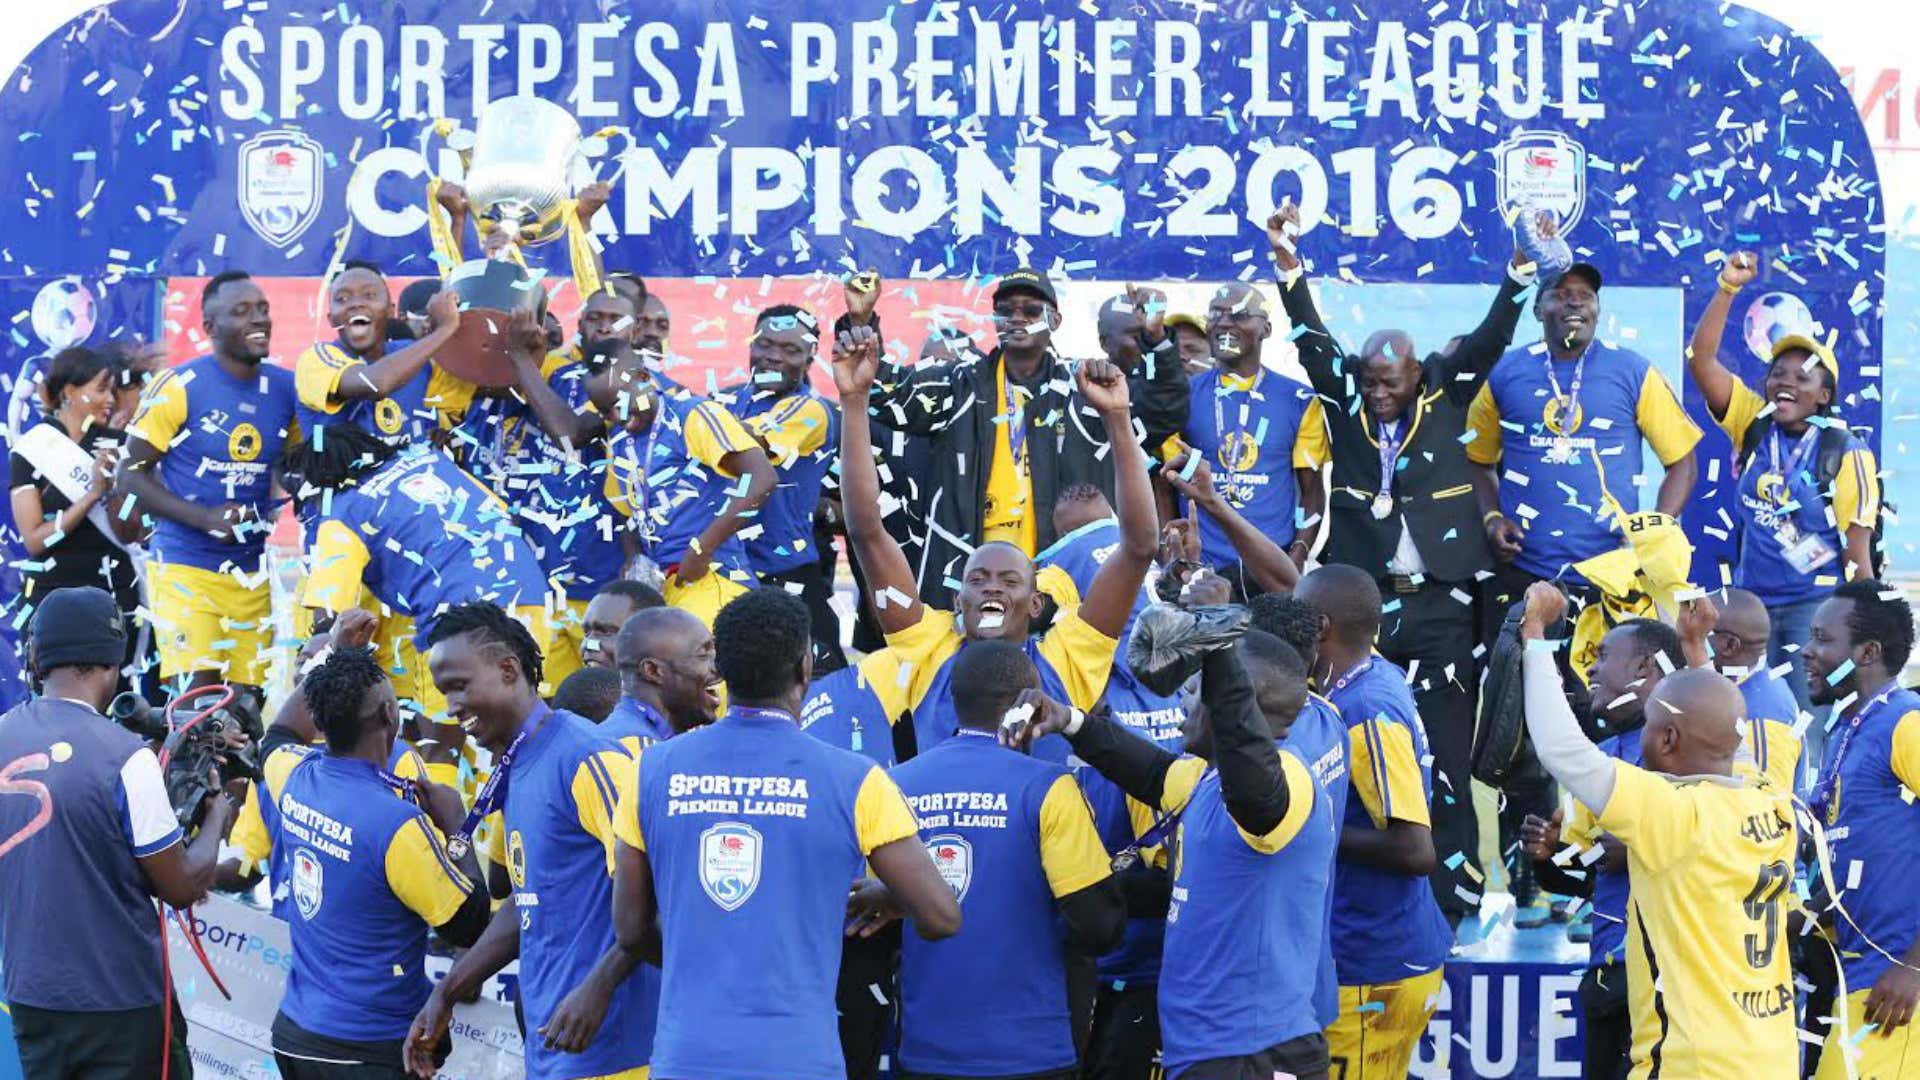 It has been a challenging season in Kenyan Premier League with Tusker being crowned champions after beating Gor Mahia to the tape. But who were the outstanding keepers?